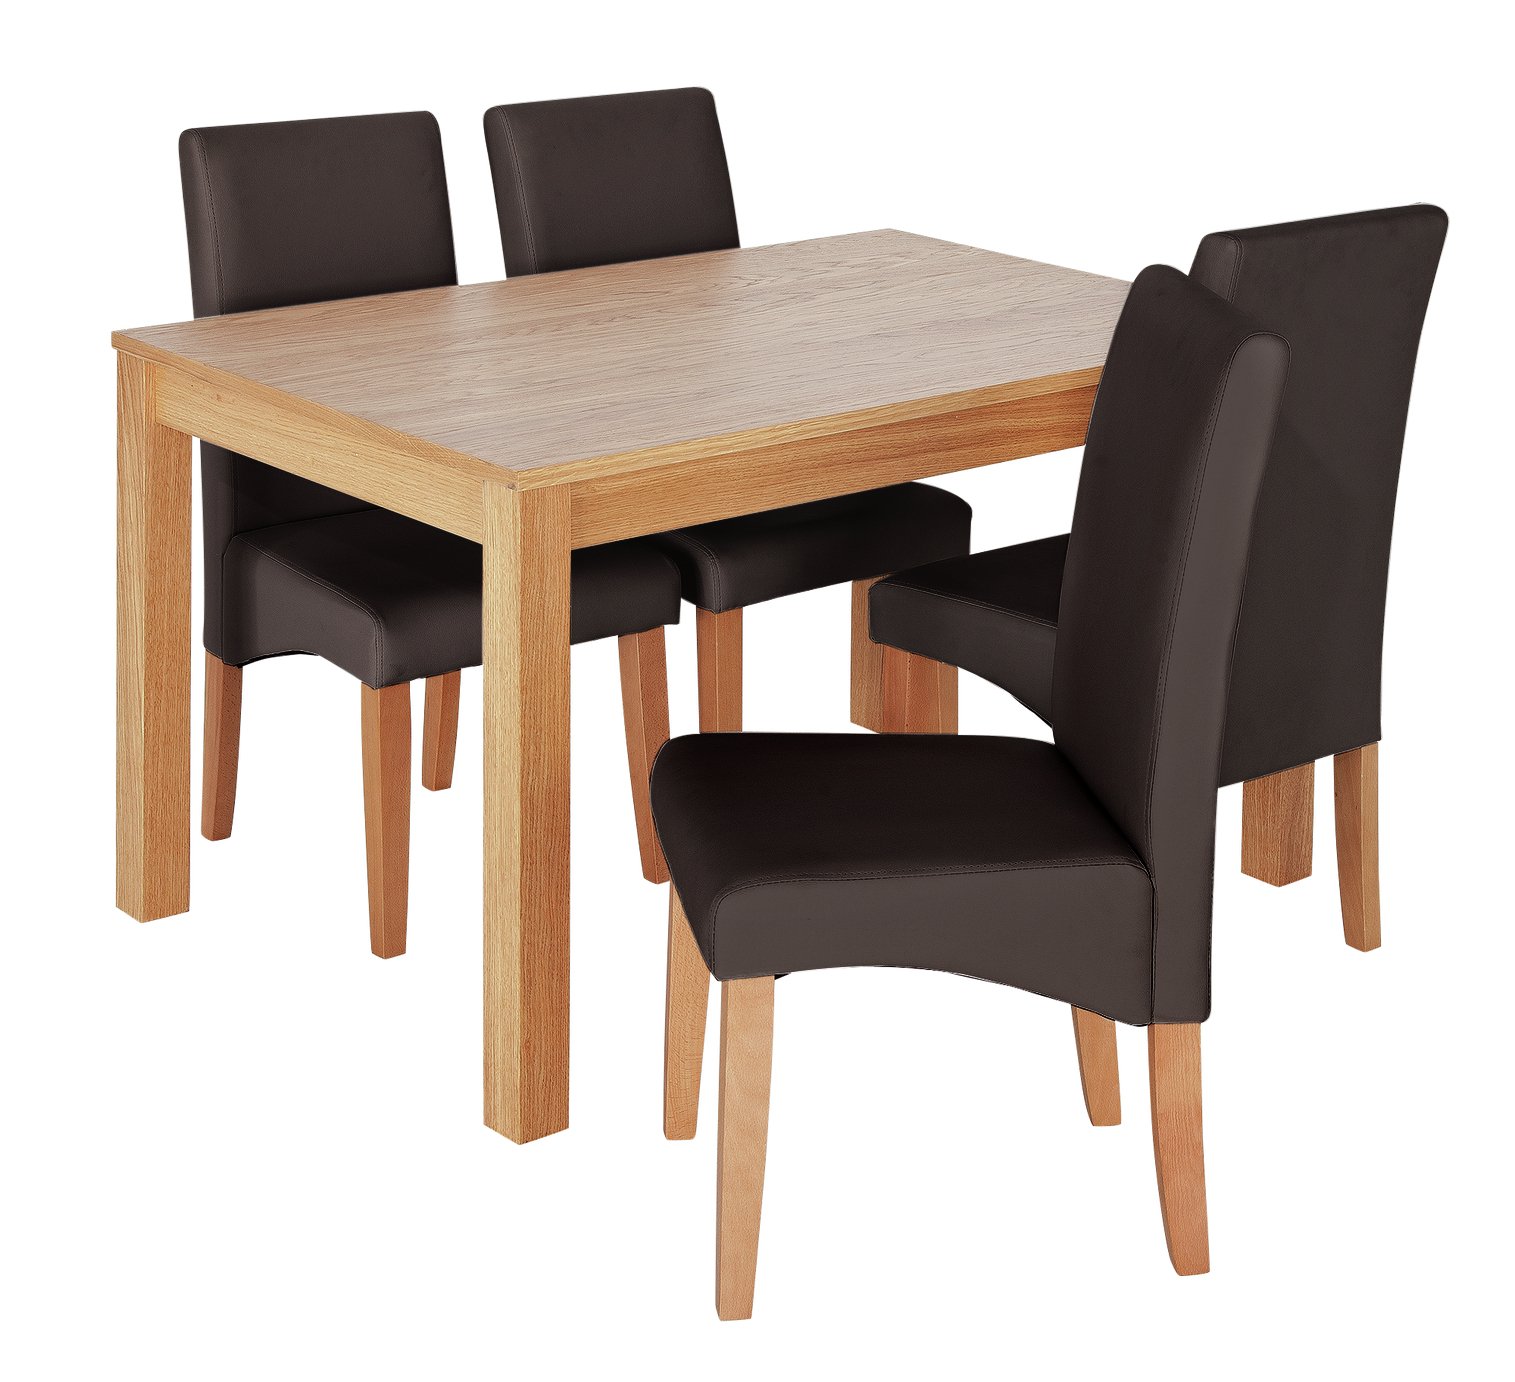 Argos Home Clifton Oak Dining Table & 4 Chocolate Chairs